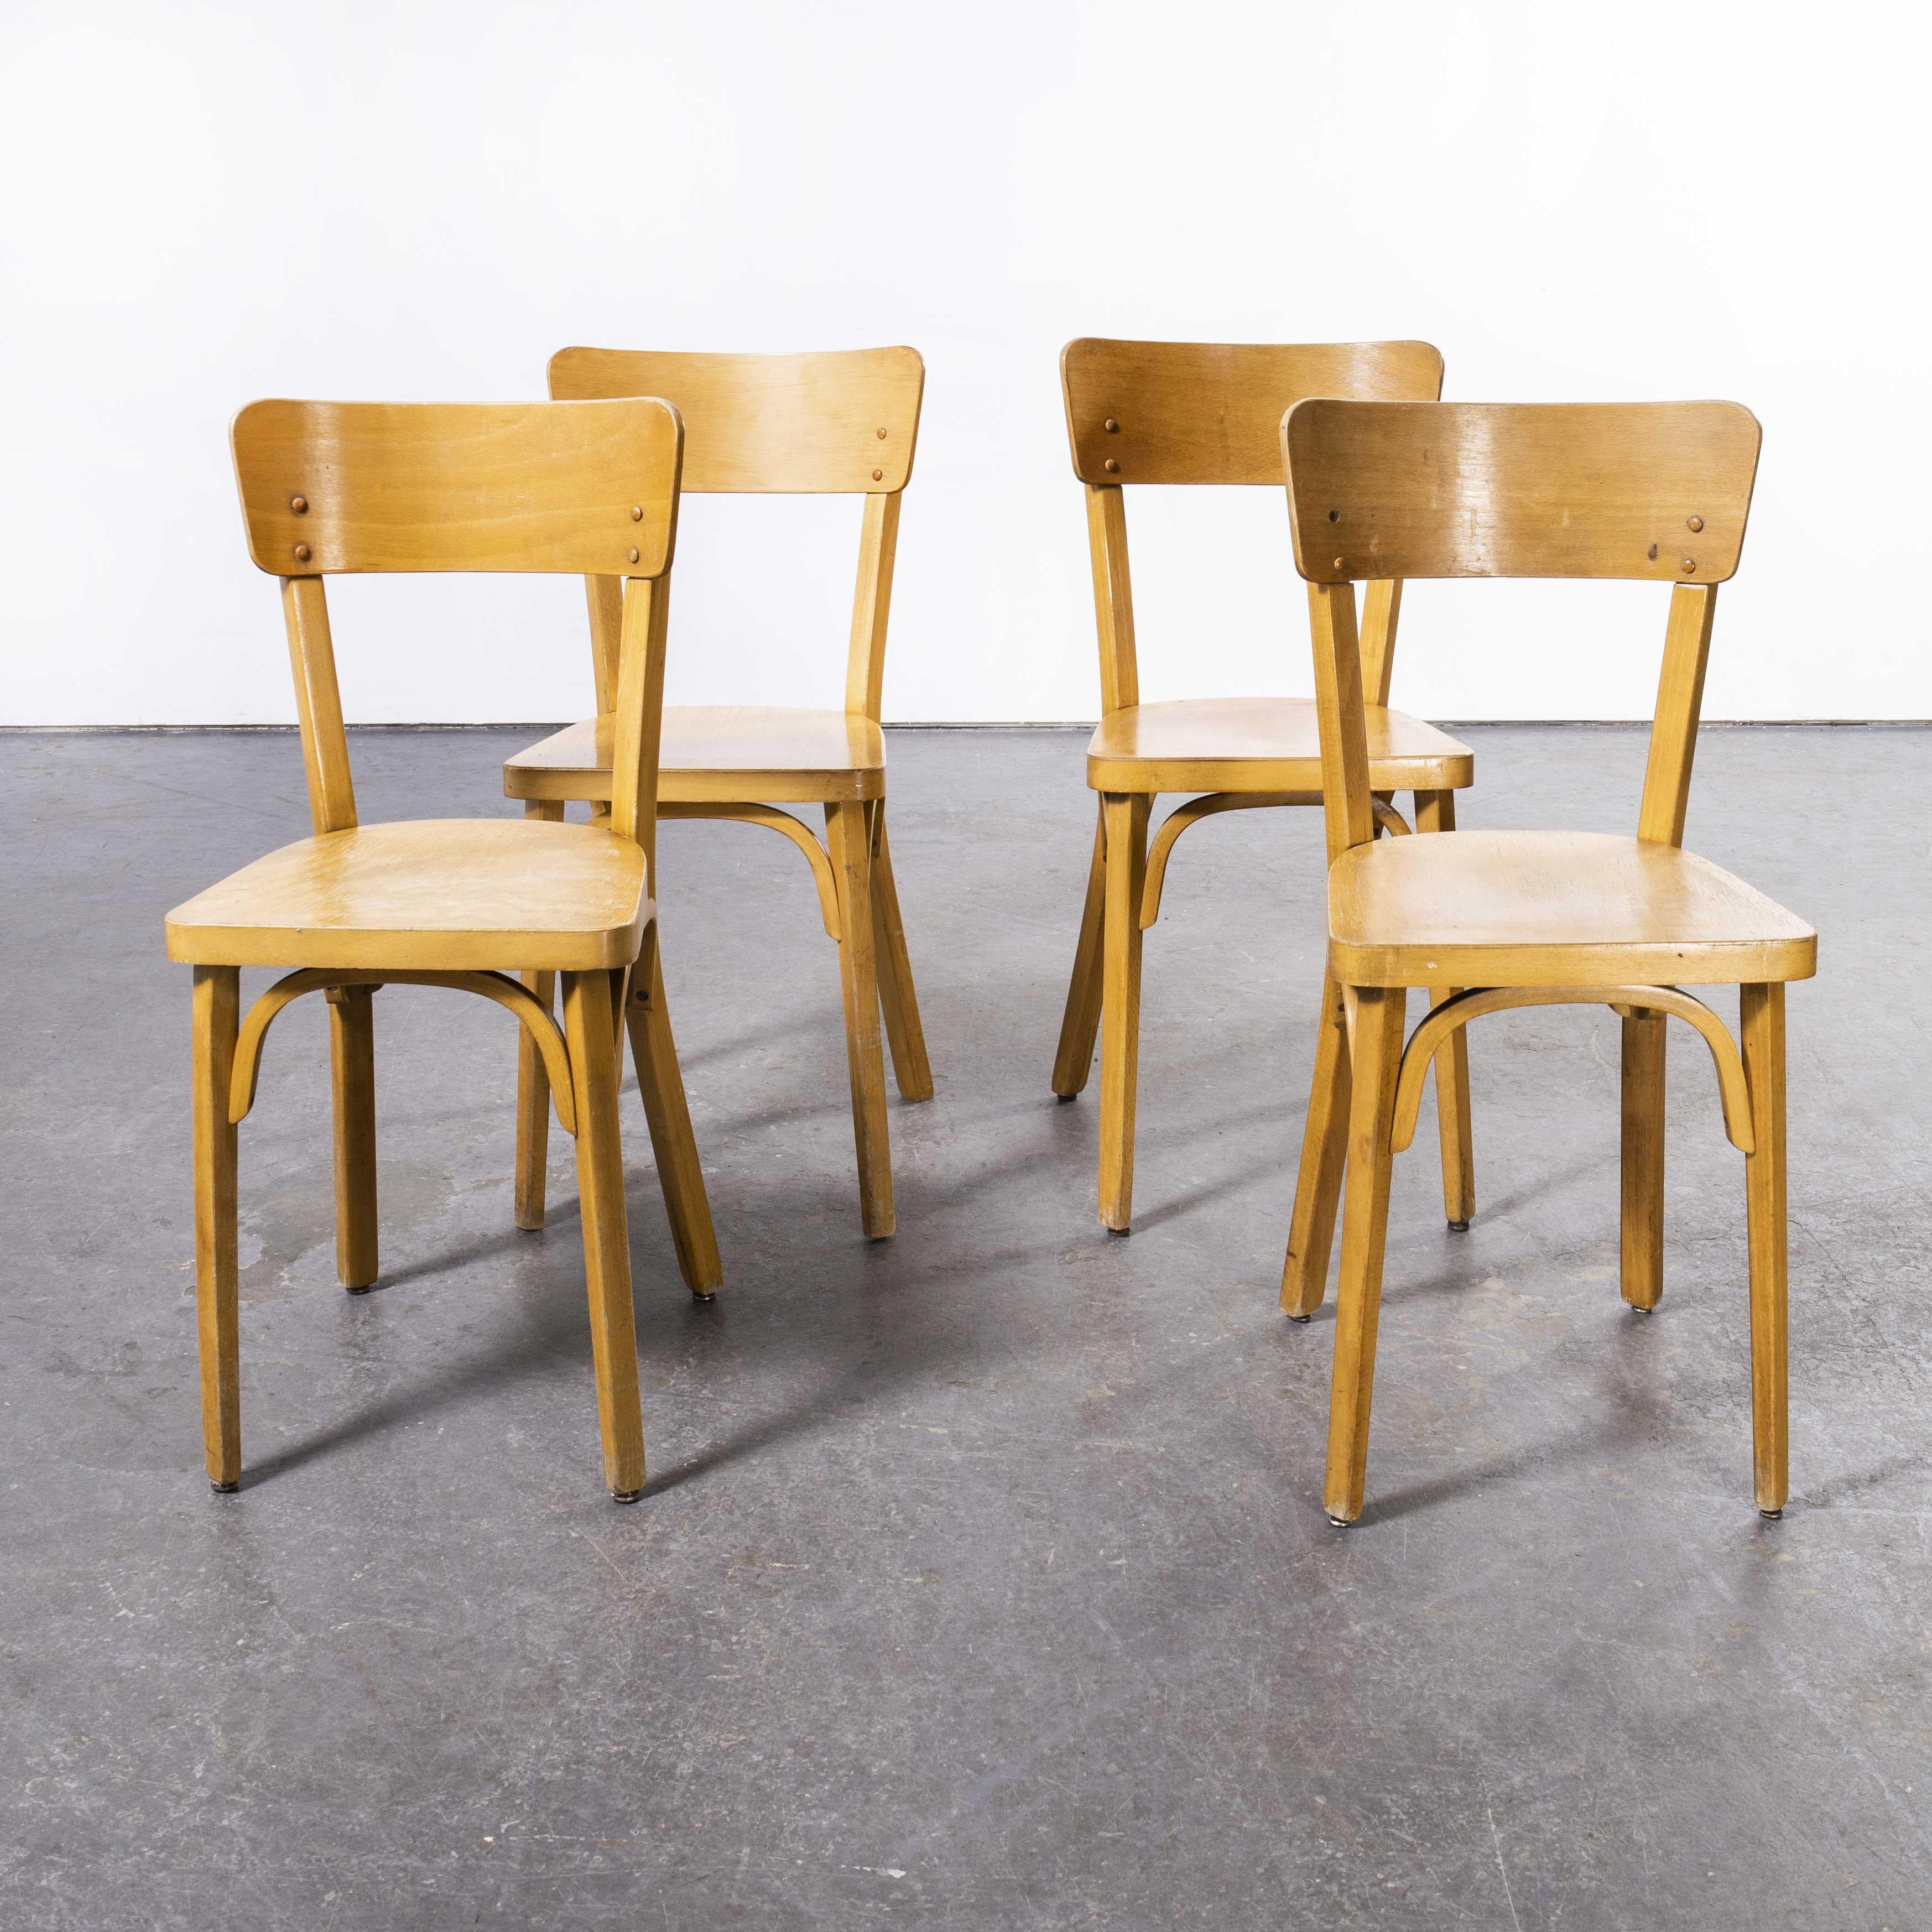 1950's French Baumann Blonde Beech Bentwood Dining Chairs, Set of Four For Sale 4